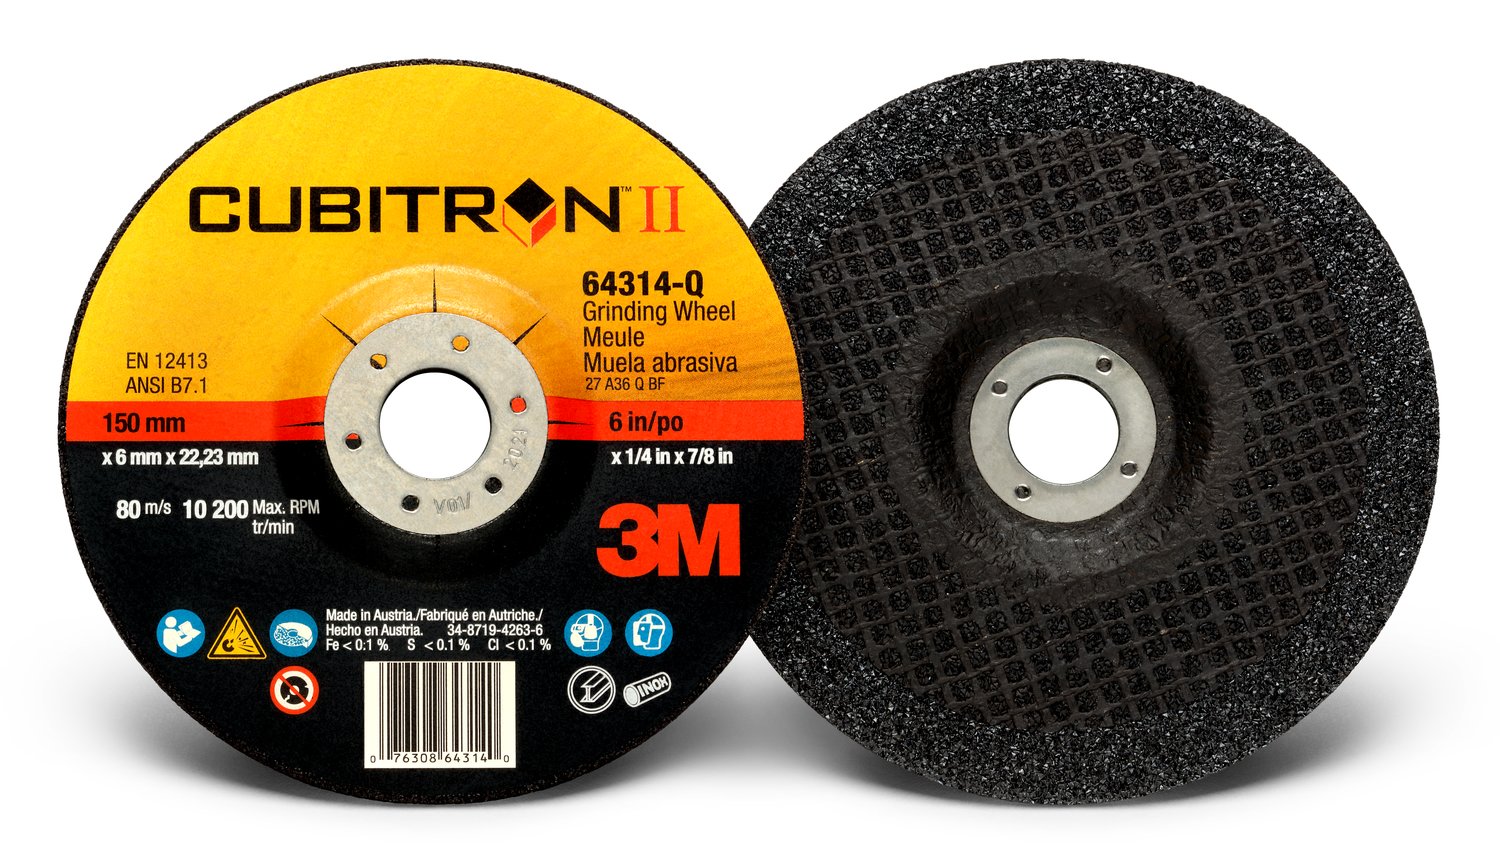 https://www.e-aircraftsupply.com/ItemImages/59/1594939E_3m-cubitron-ii-depressed-center-grinding-wheel-64314-6-in-x-1-4-in-x-7-8-in-front-back-view.jpg